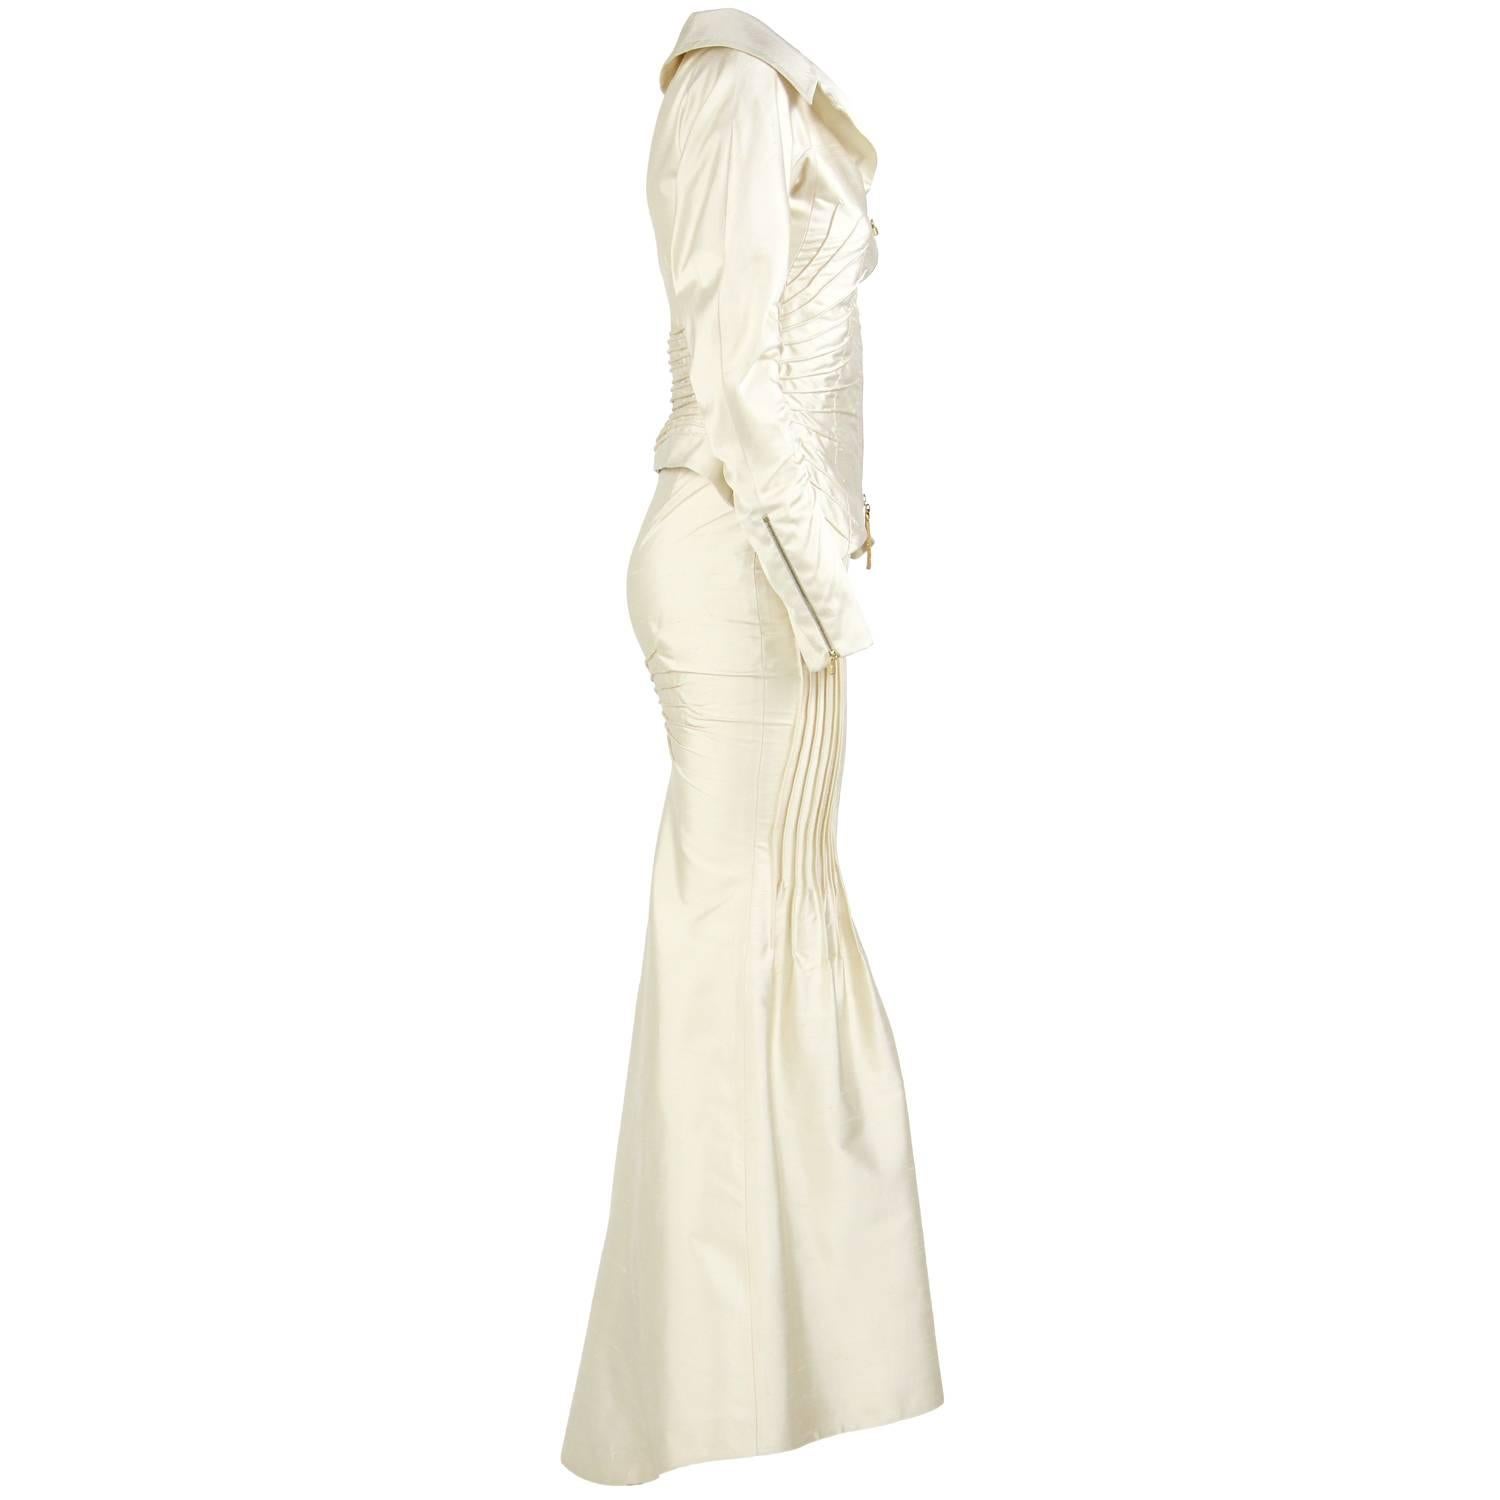 A.N.G.E.L.O. Vintage - Italy

Two-piece vintage wedding suit by Gianfranco Ferré, in ivory silk 100%. It features a crop jacket with embossed tubular seams which create a decoration, repeated on the sleeves. Golden metal zip on the front and the